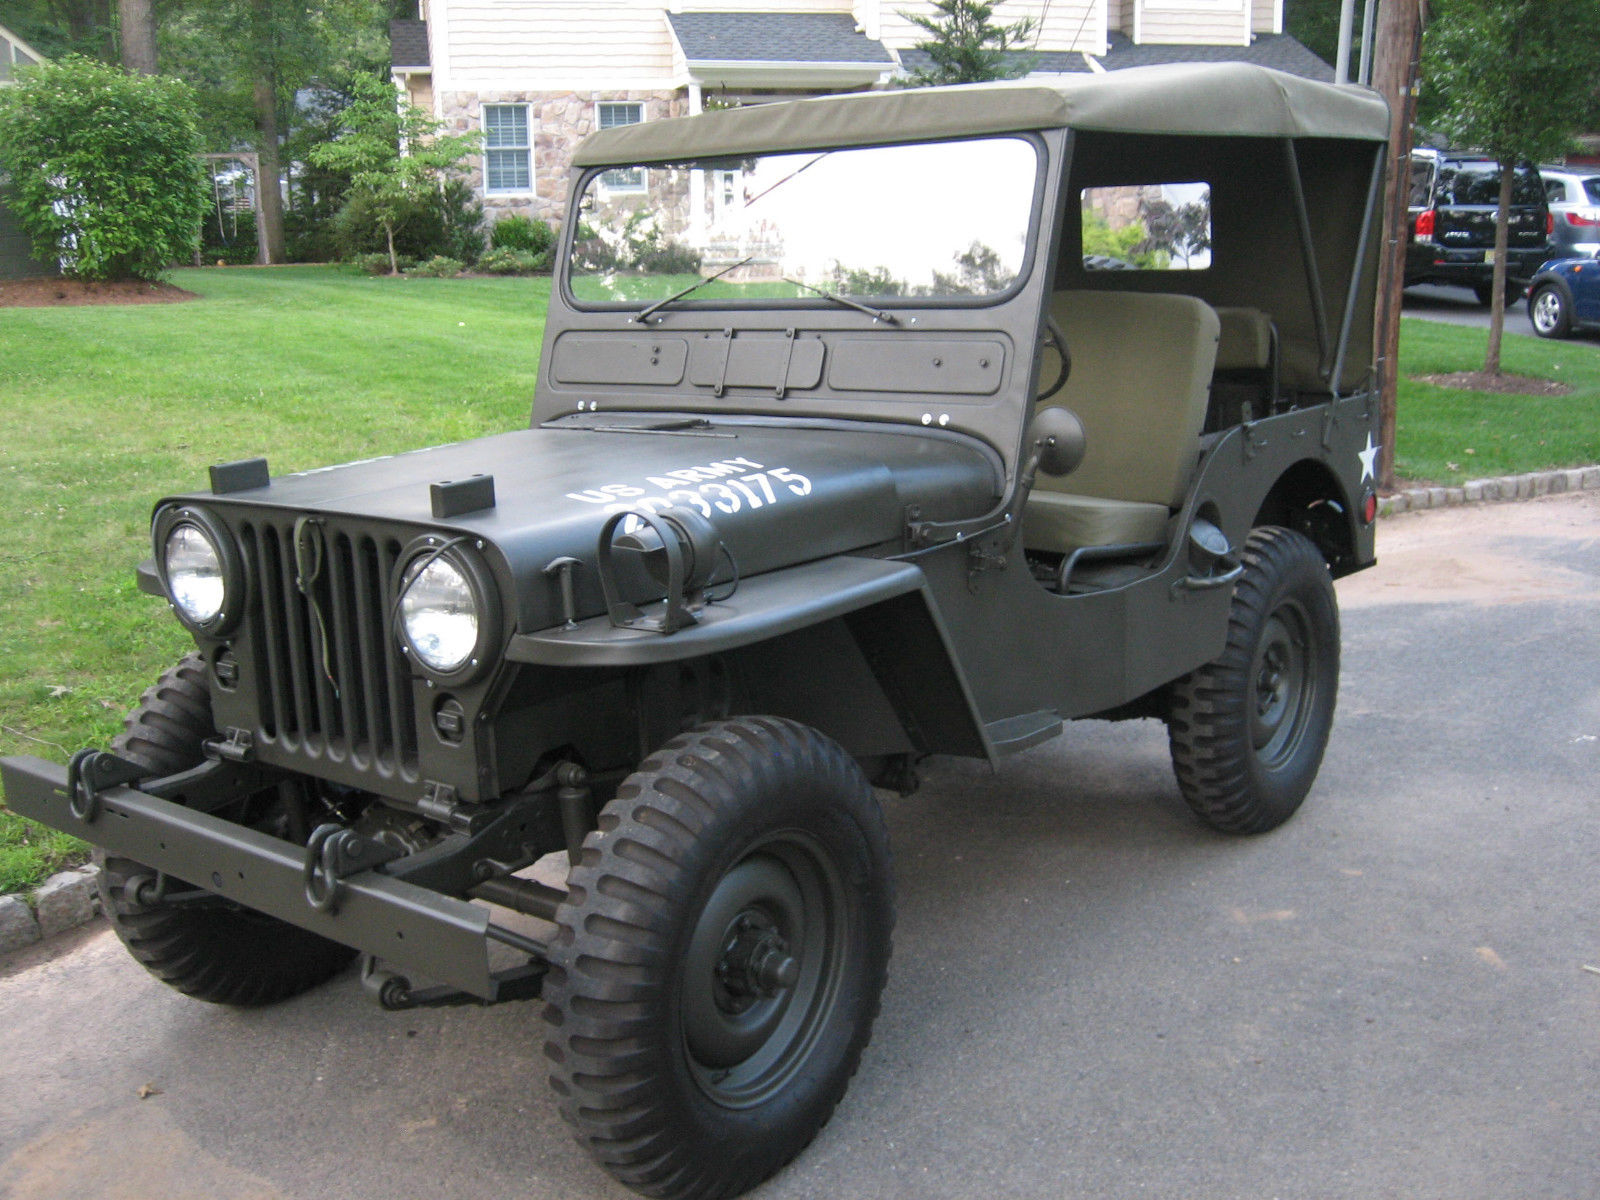 Blackout headlight for MB? - The CJ2A Page Forums